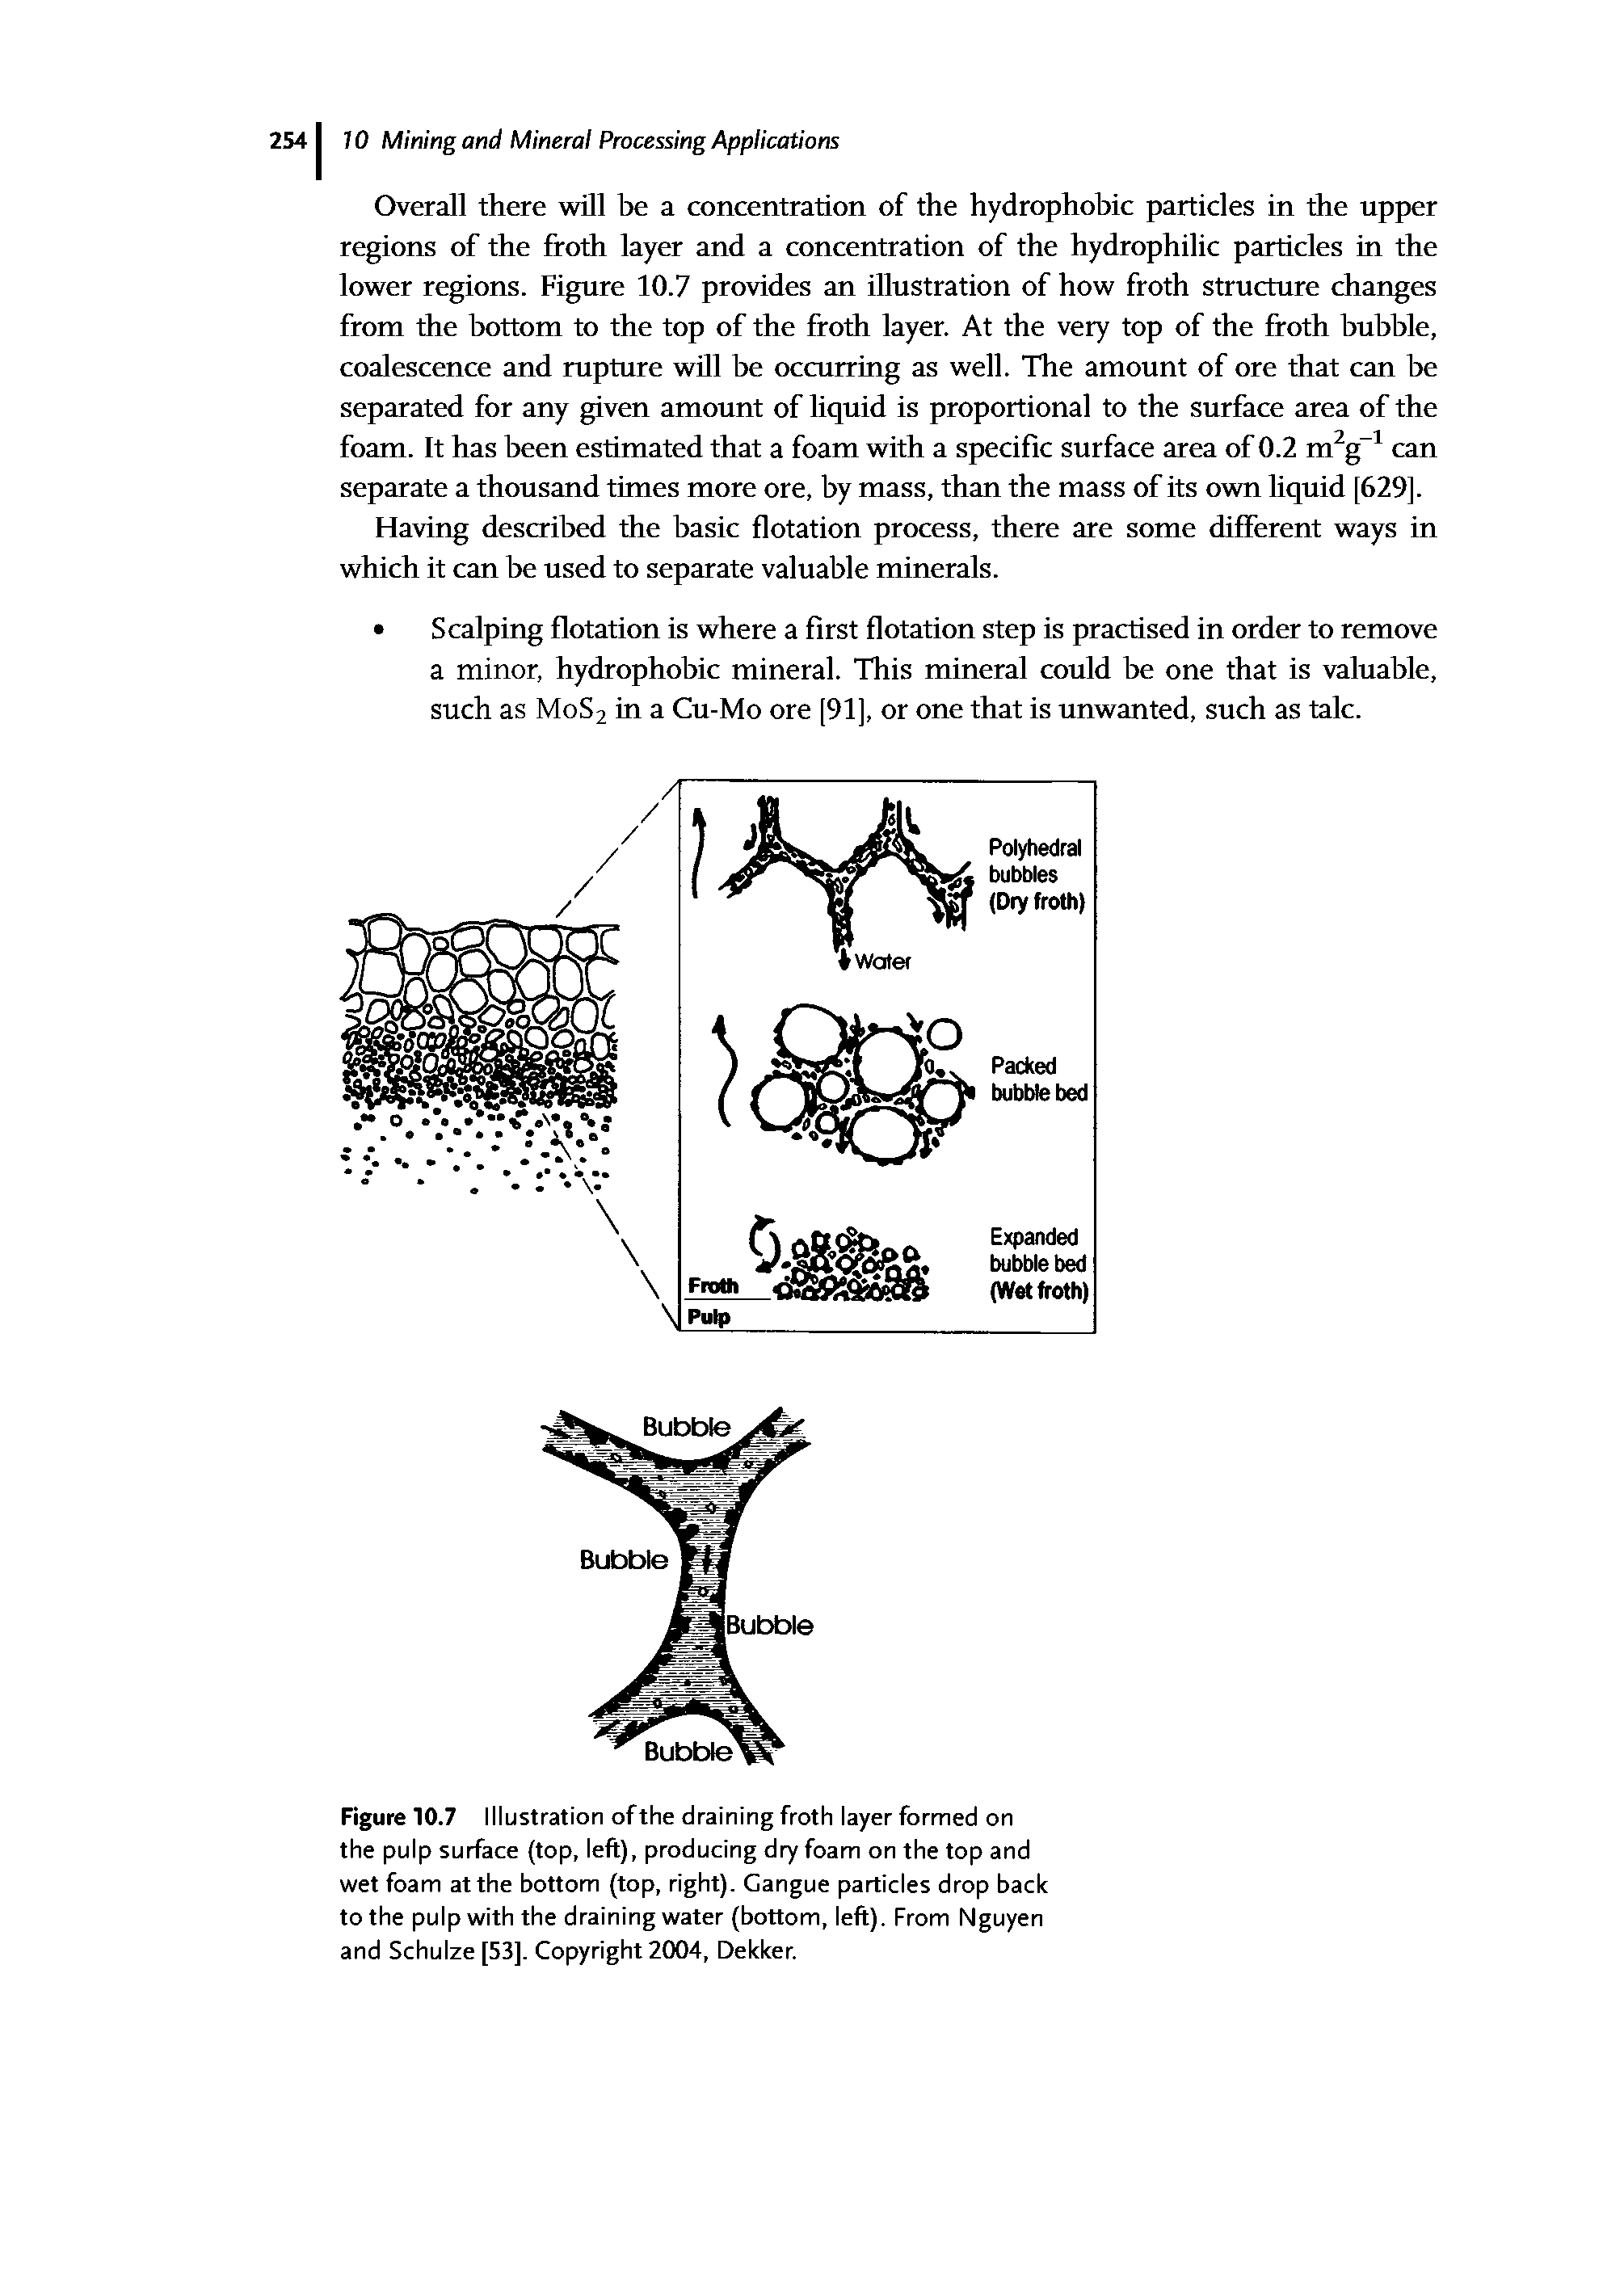 Figure 10.7 Illustration ofthe draining froth layer formed on the pulp surface (top, left), producing dry foam on the top and wet foam at the bottom (top, right). Gangue particles drop back to the pulp with the draining water (bottom, left). From Nguyen and Schulze [53], Copyright 2004, Dekker.